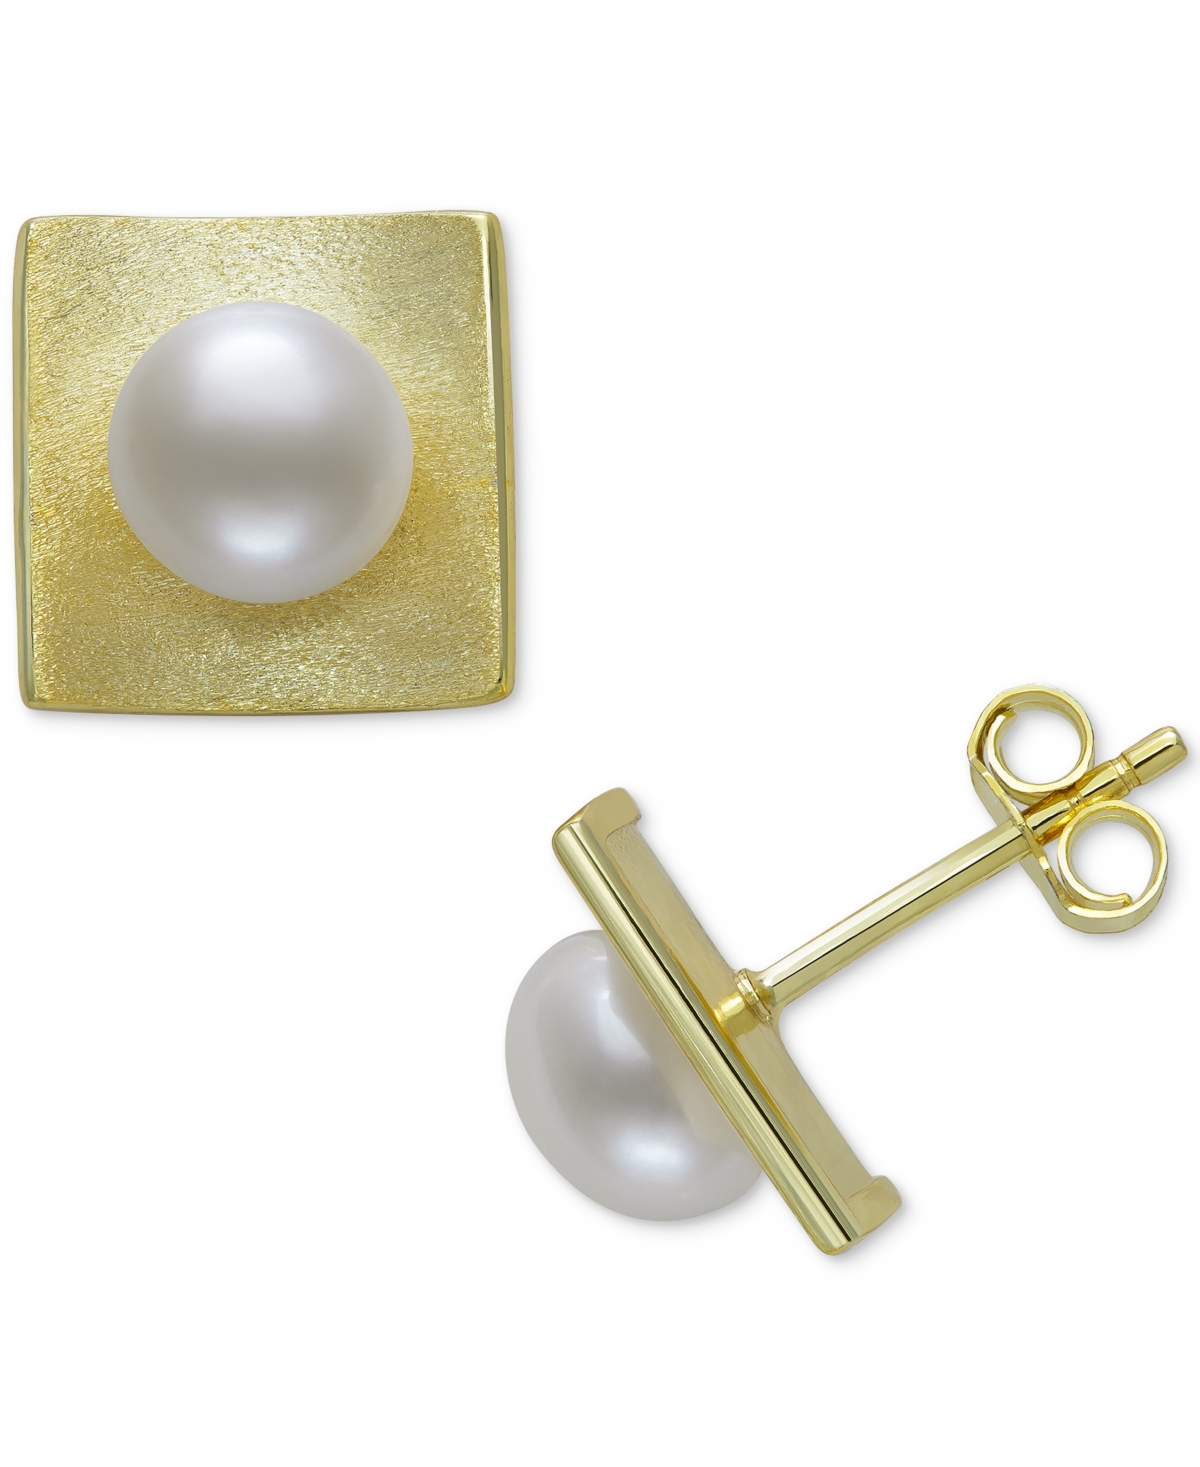 Belle de Mer Cultured Freshwater Button Pearl (7-8mm) Square Stud Earrings in 14k Gold-Plated Sterling Silver